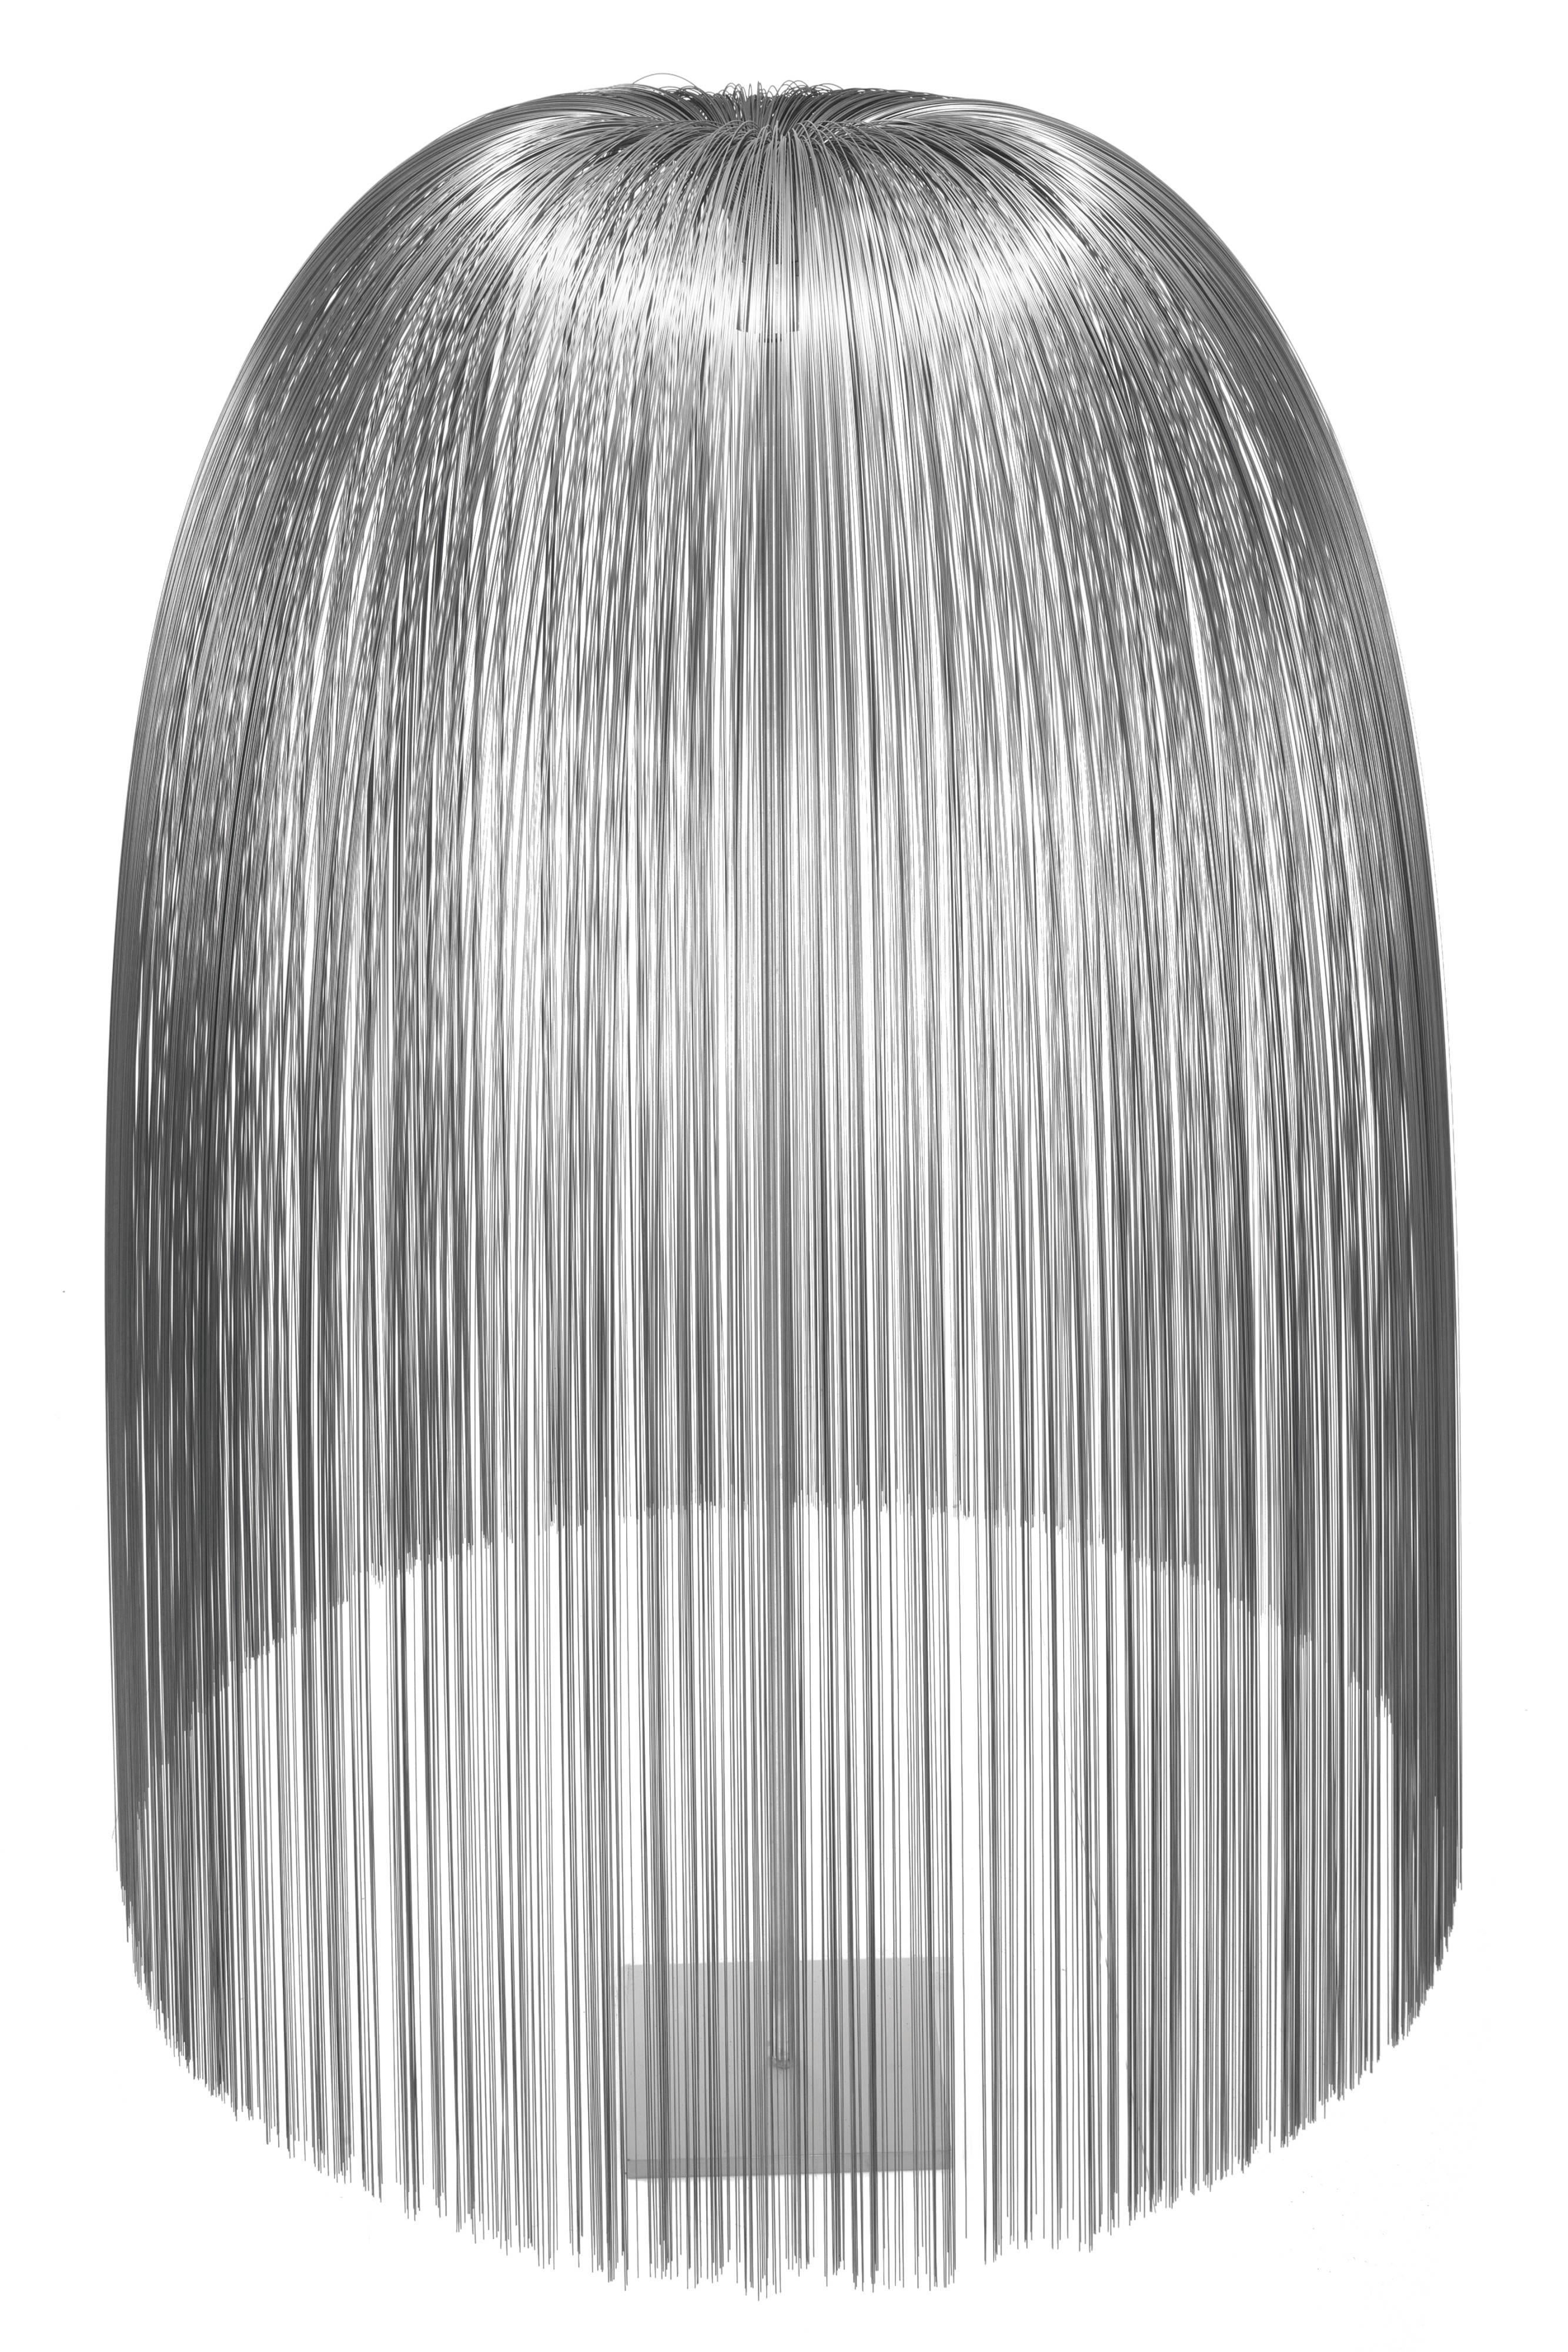 A heavy stainless steel base and pole support a spray of hundreds of delicate stainless wires, arcing from the center creating a graceful drape of steel. One of Bertoia's most celebrated and desirable creations inspired by the willow trees on